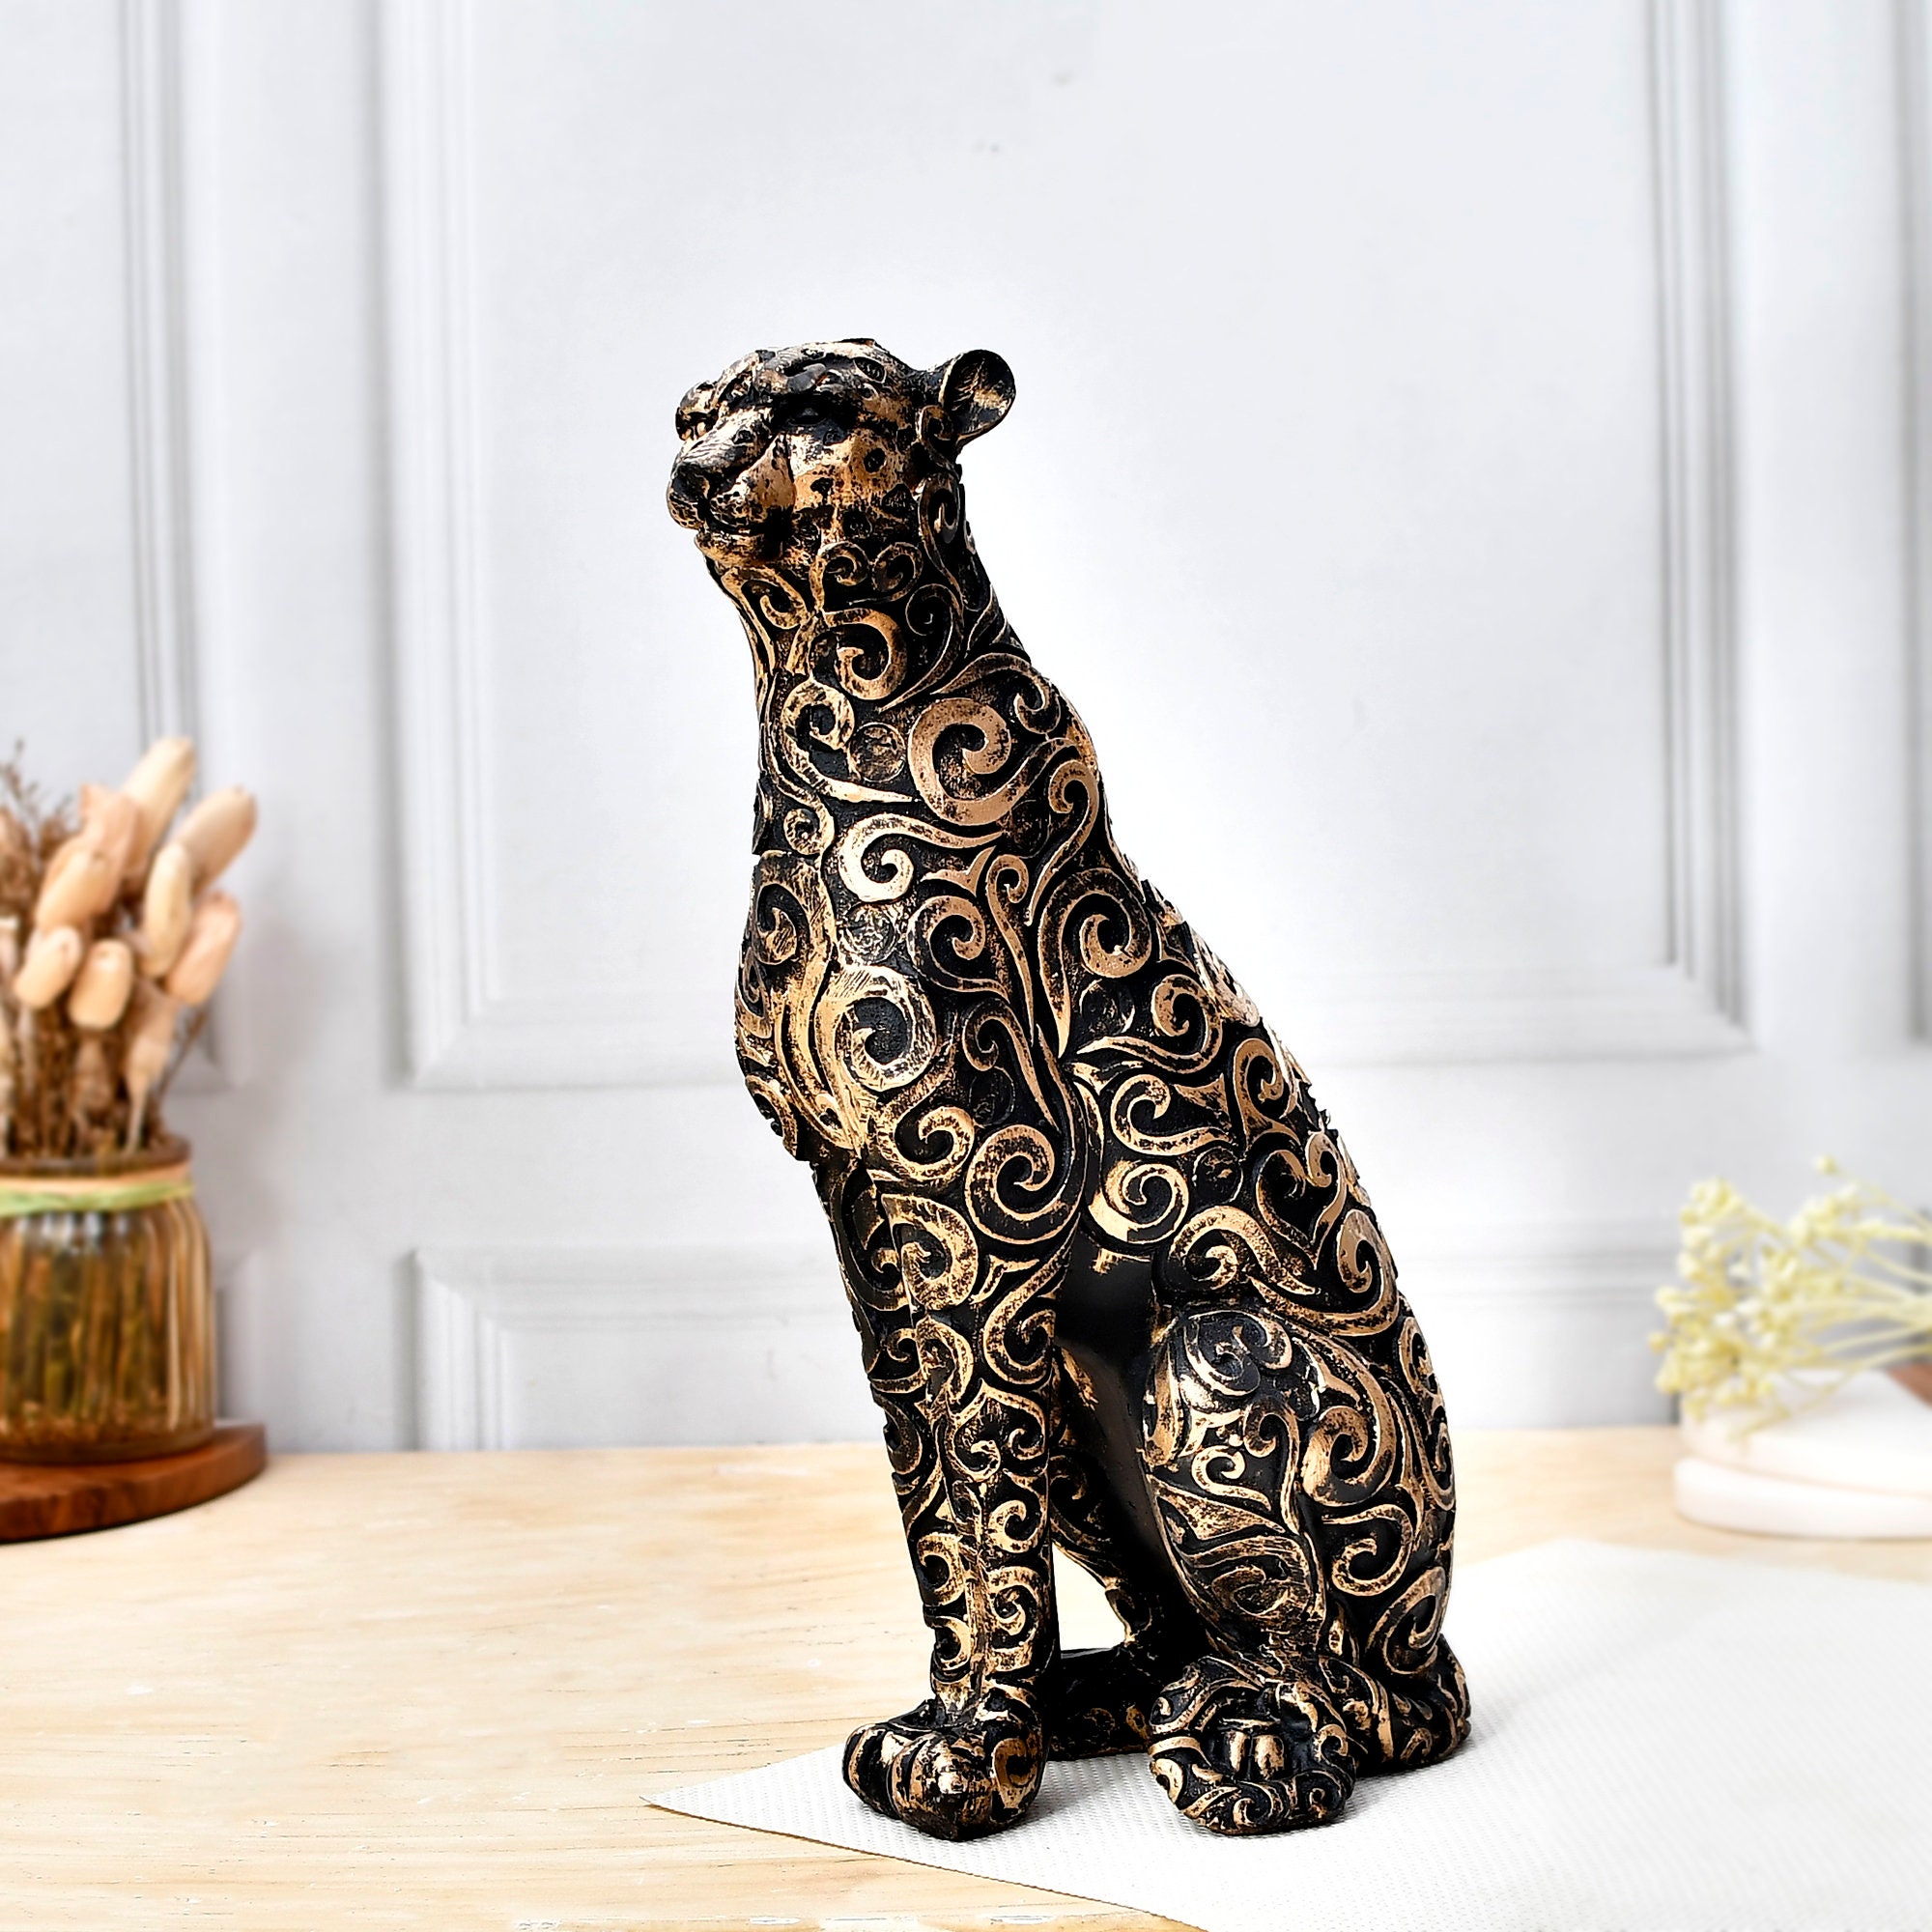 Black and Gold Leopard Statue Sitting on Table Black and Gold Leopard Statue  Resin Leopard Figurine Black and Gold Home Décor 